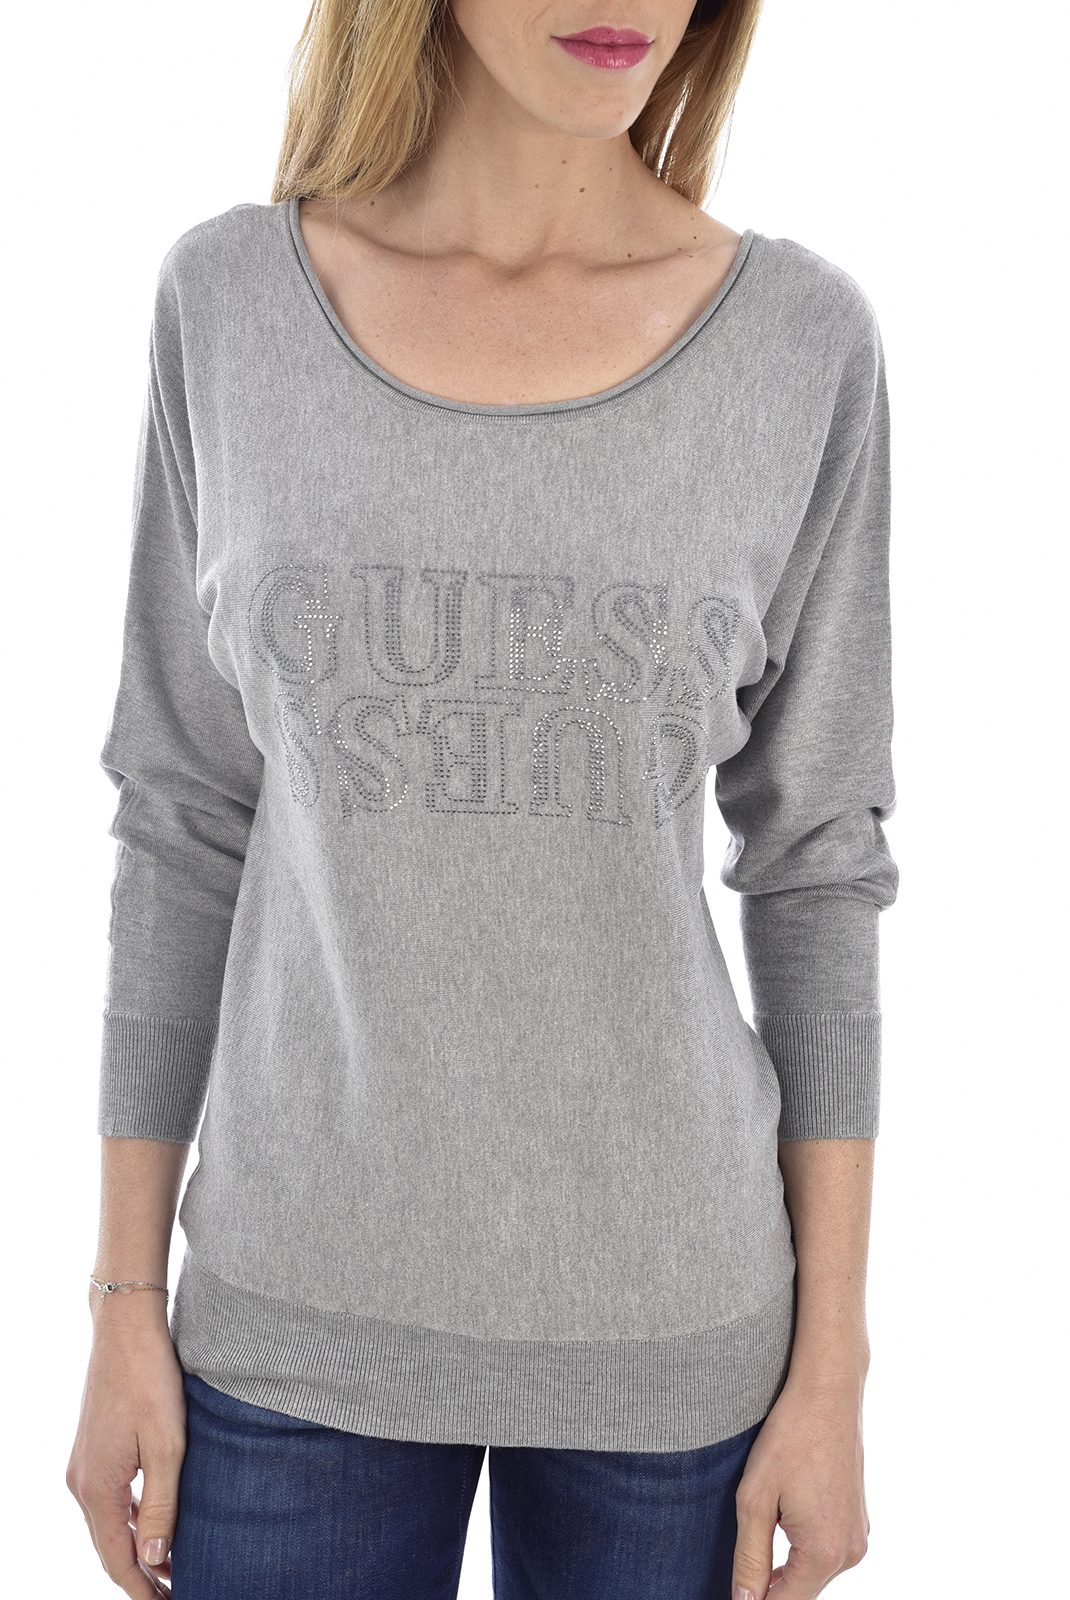 Guess Pull Gris À Col Rond W93r59 